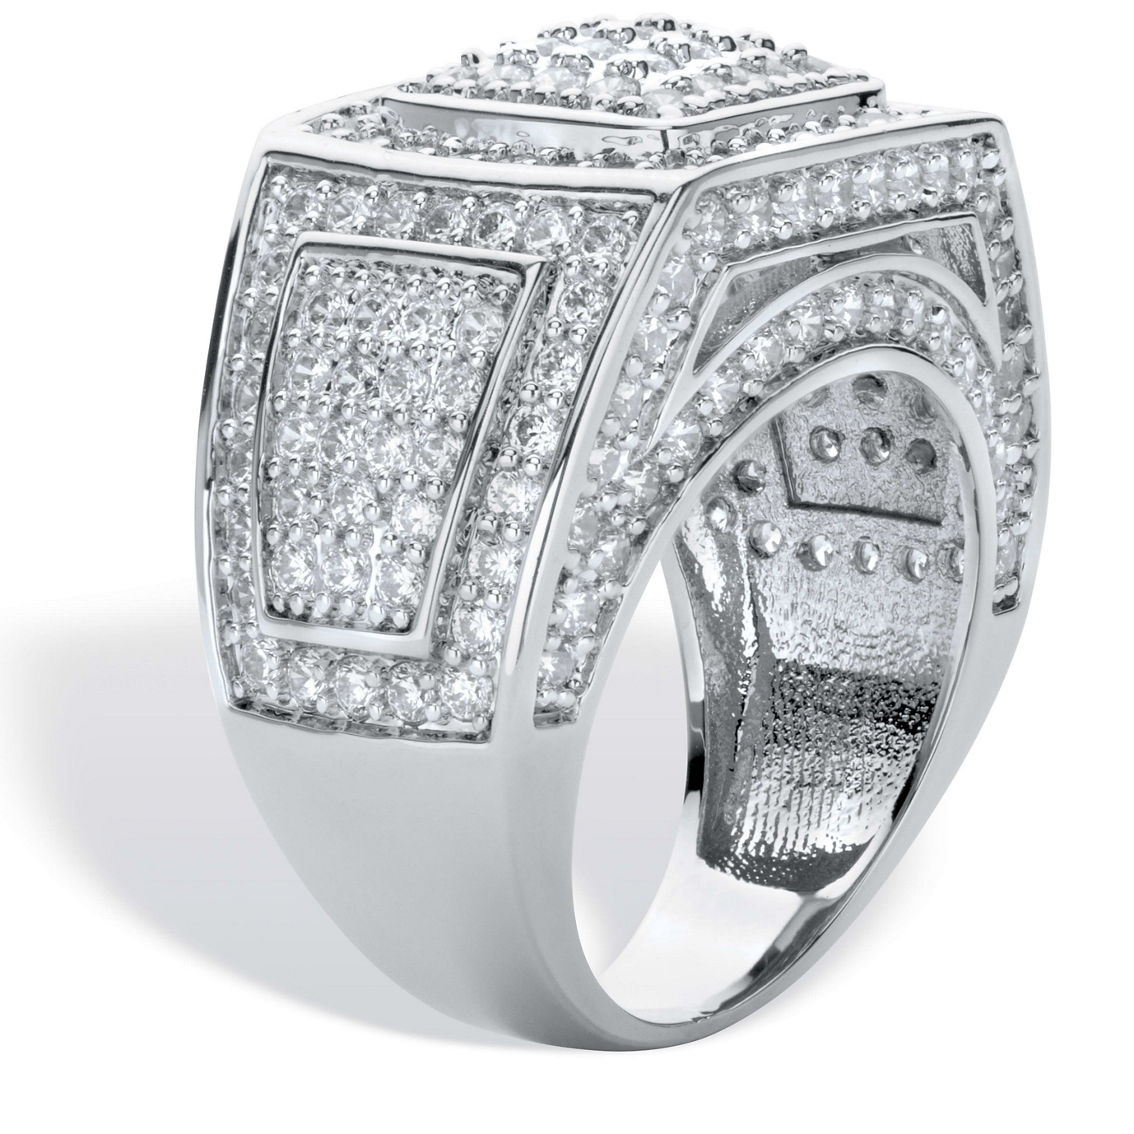 PalmBeach Men's 3.20 Cttw. White Cubic Zirconia Sqaure Cut Platinum Plated Ring - Image 2 of 5